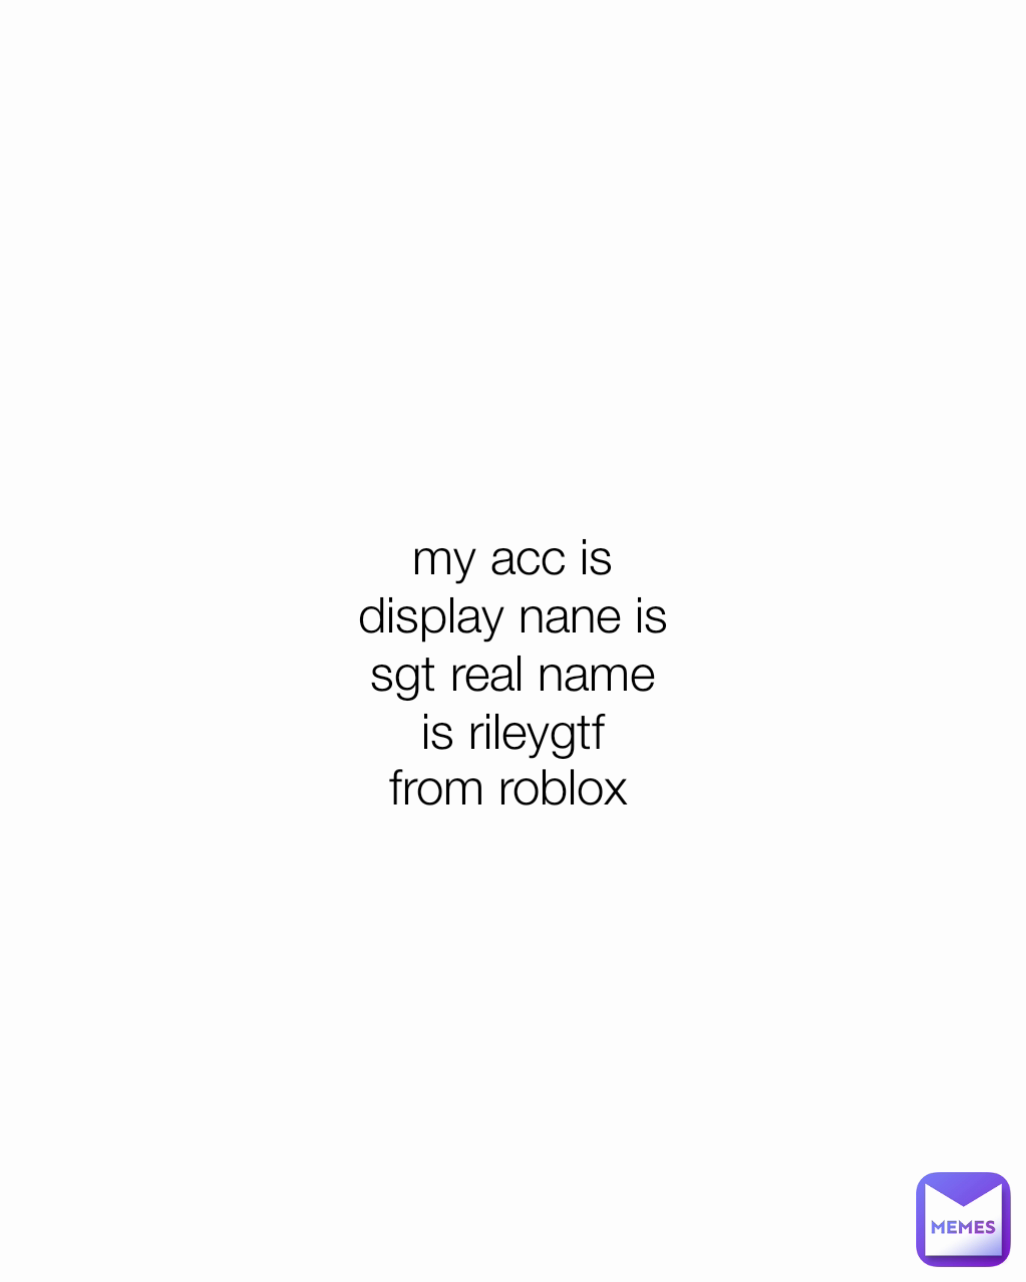 my acc is display nane is sgt real name is rileygtf from roblox
